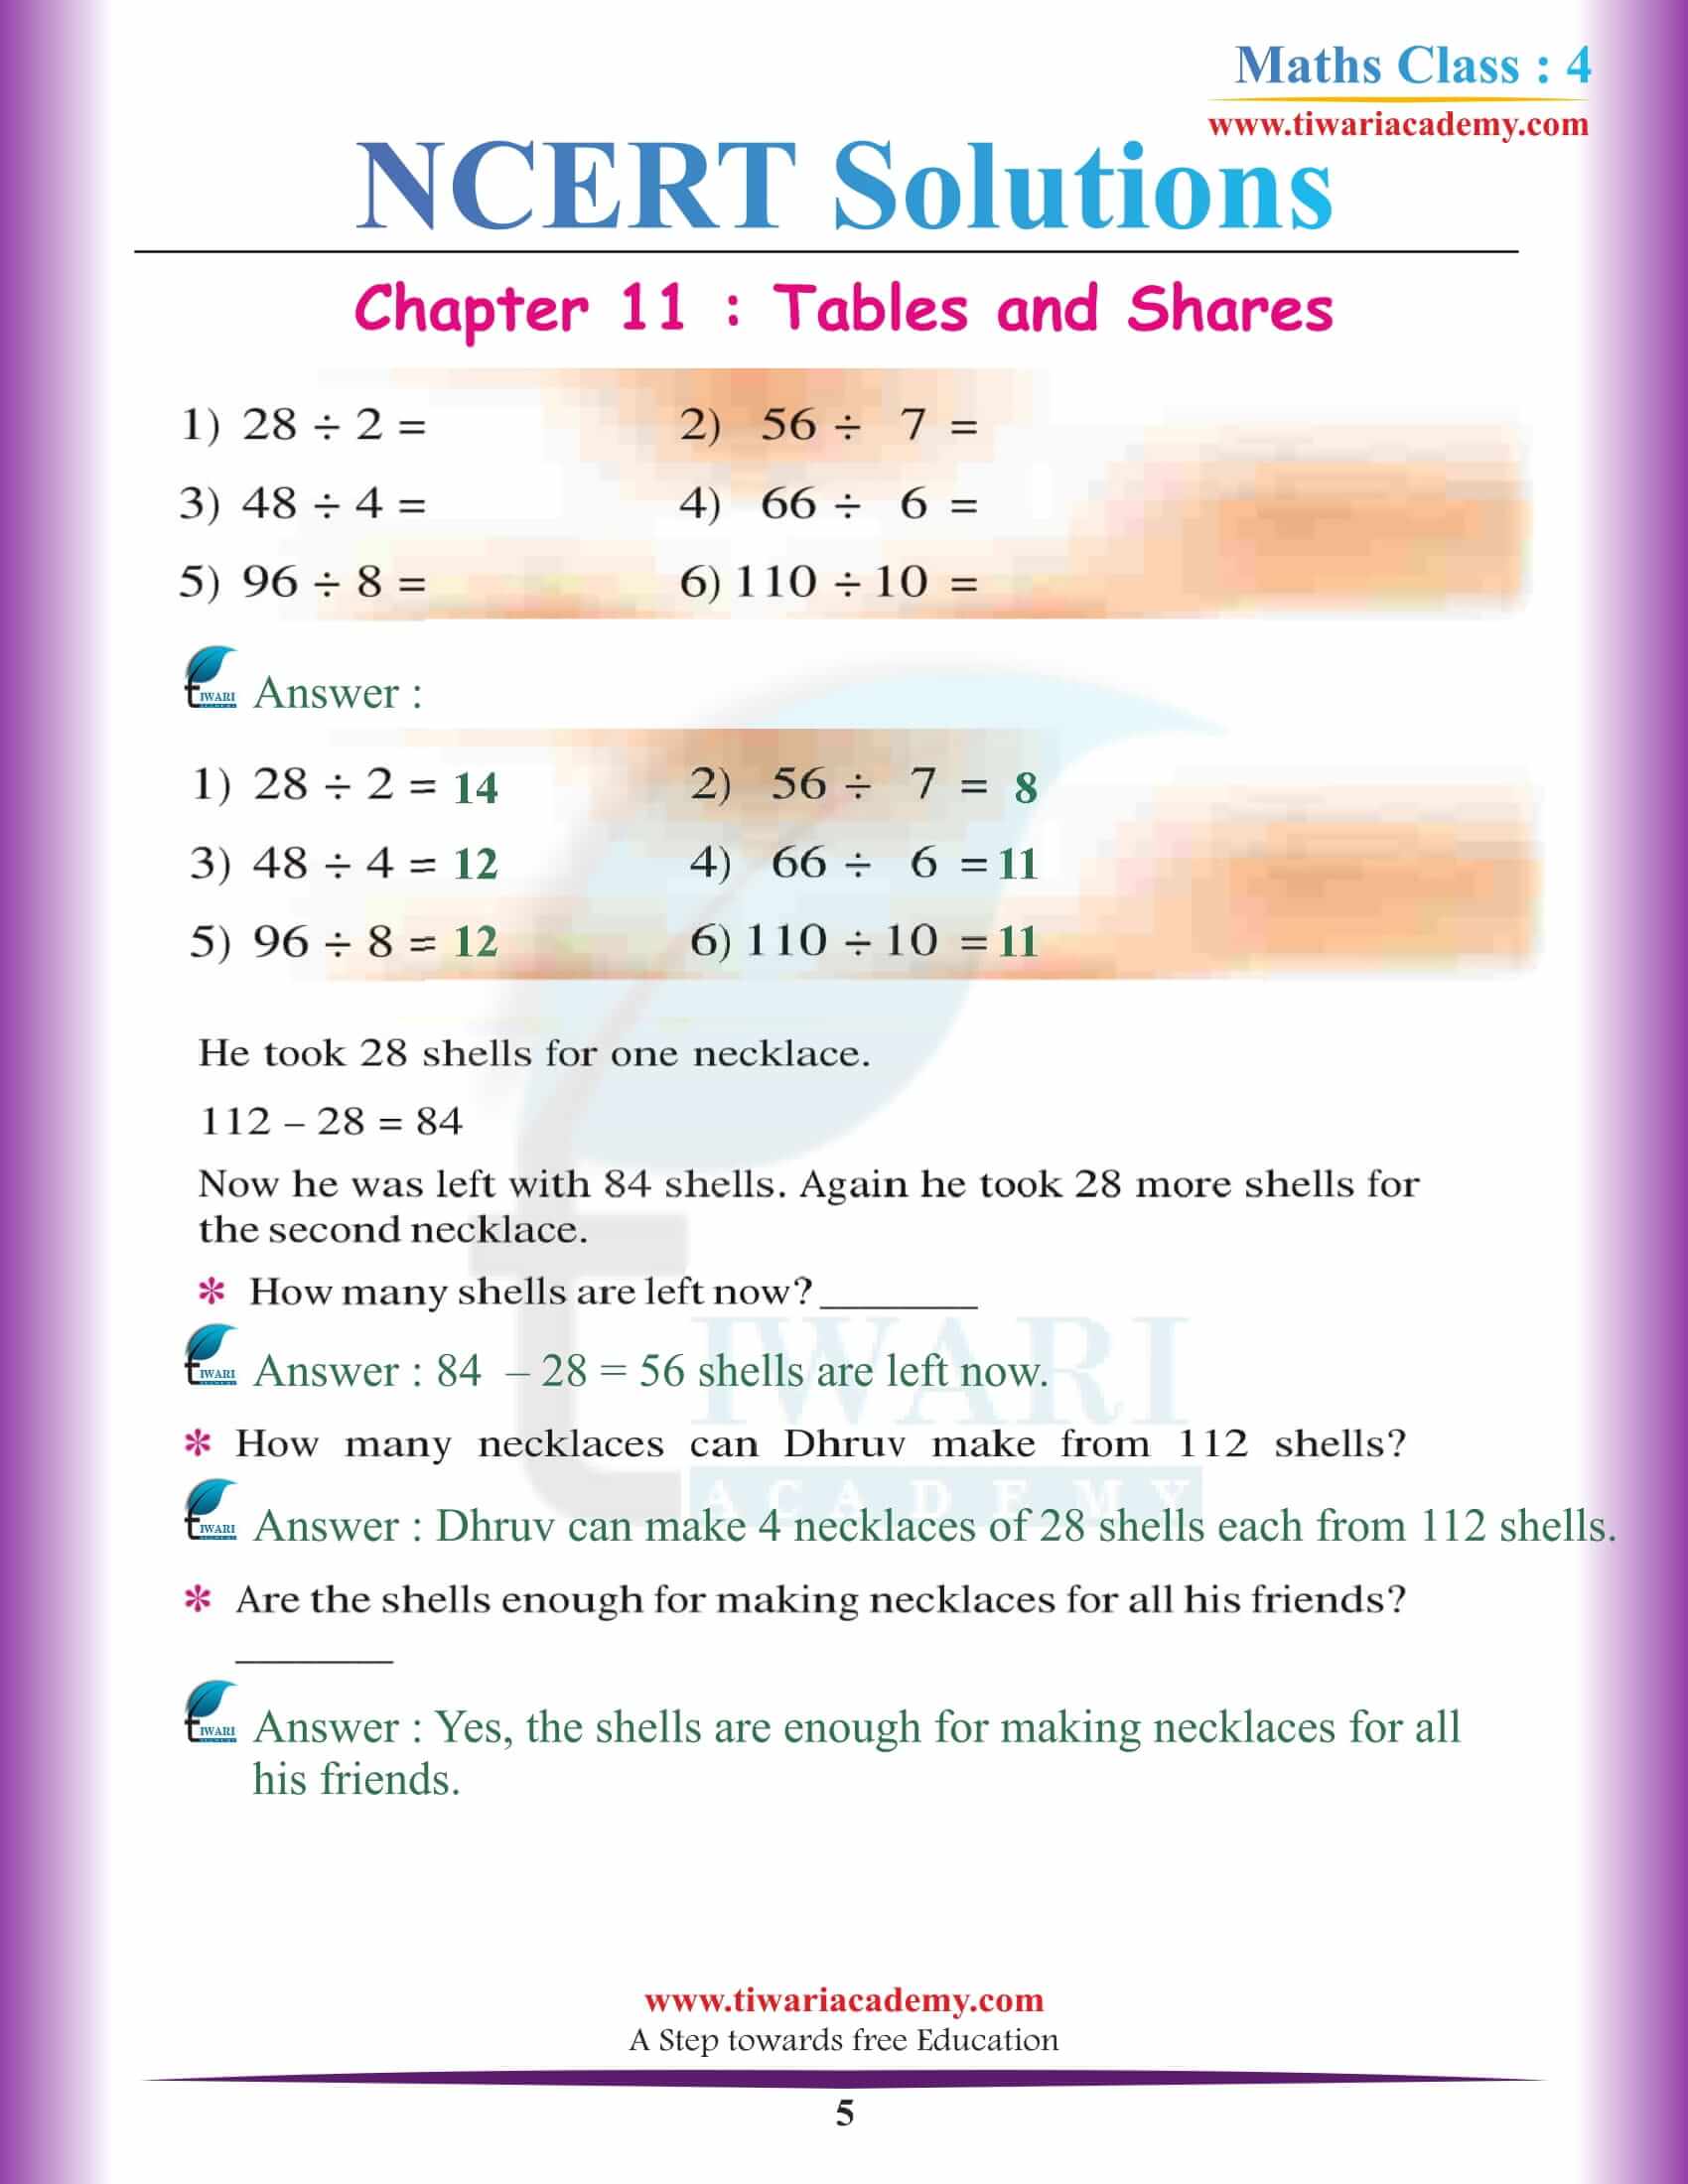 NCERT Solutions for Class 4 Maths Chapter 11 download